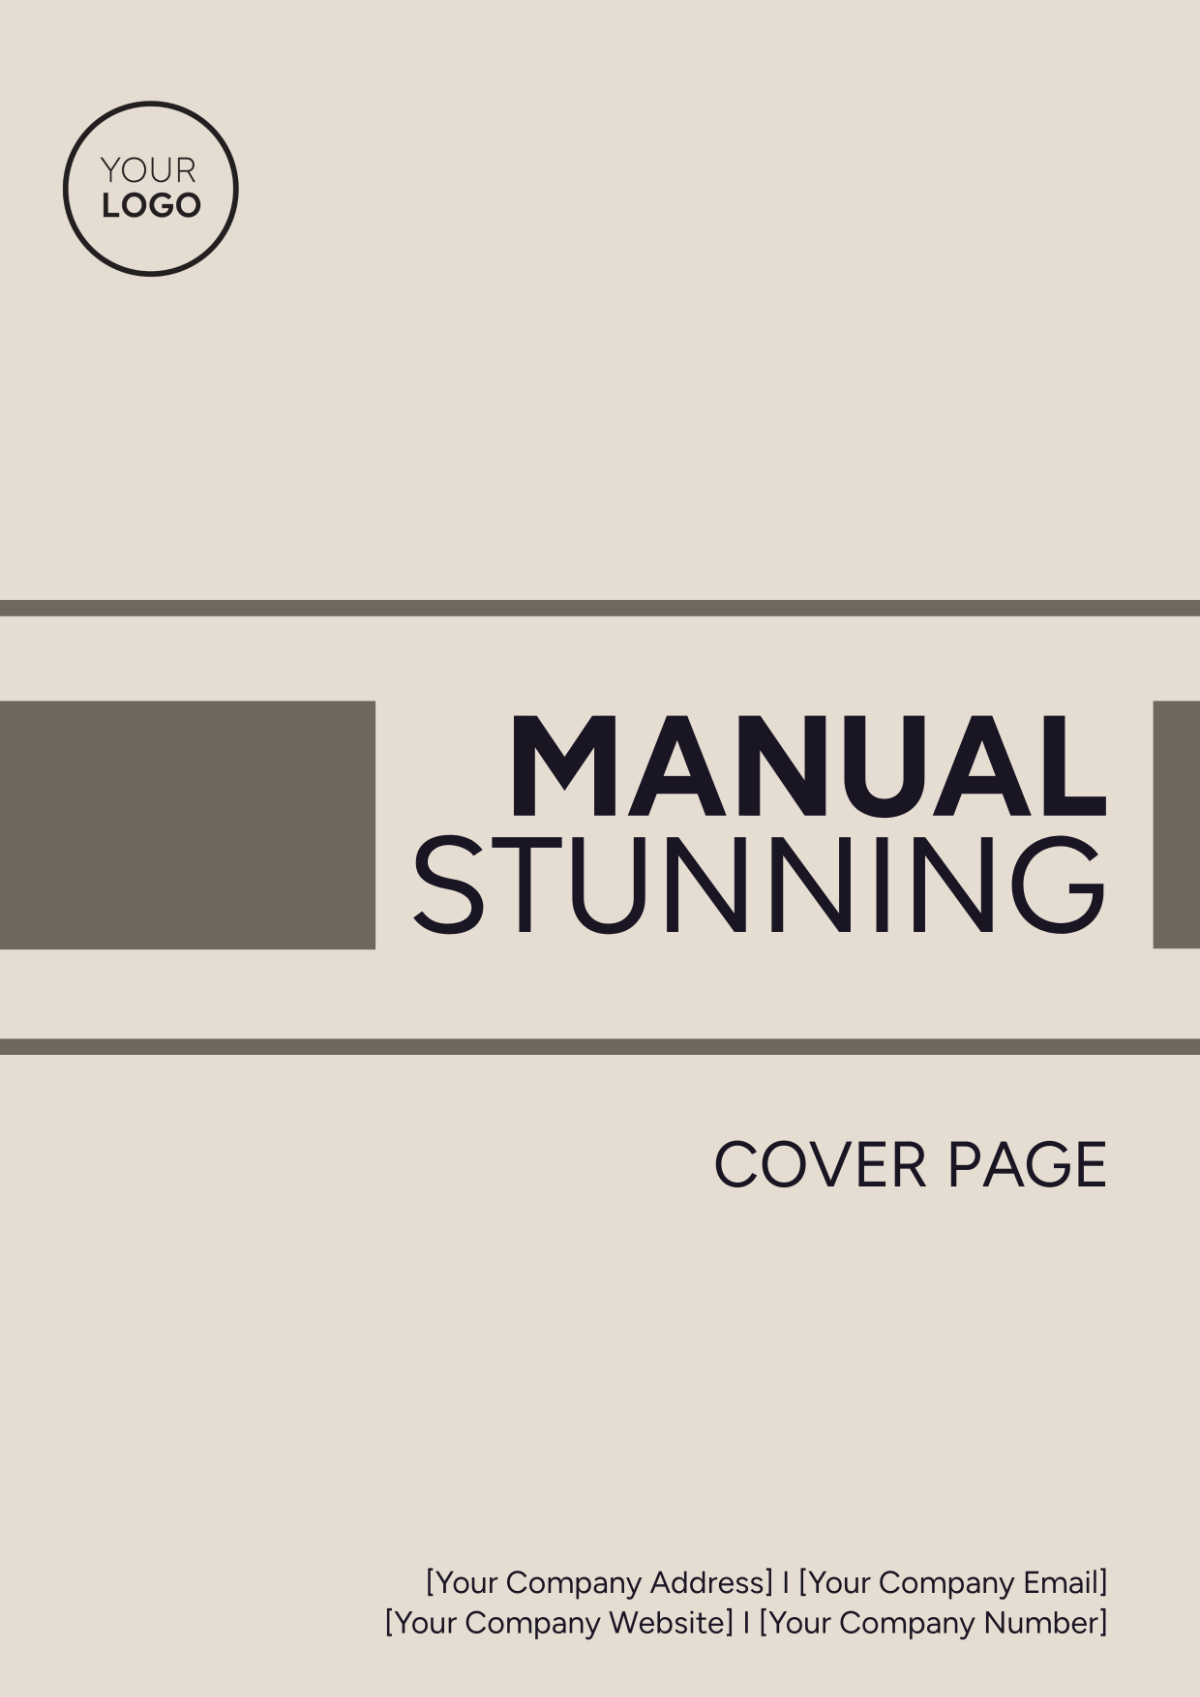 Manual Stunning Cover Page